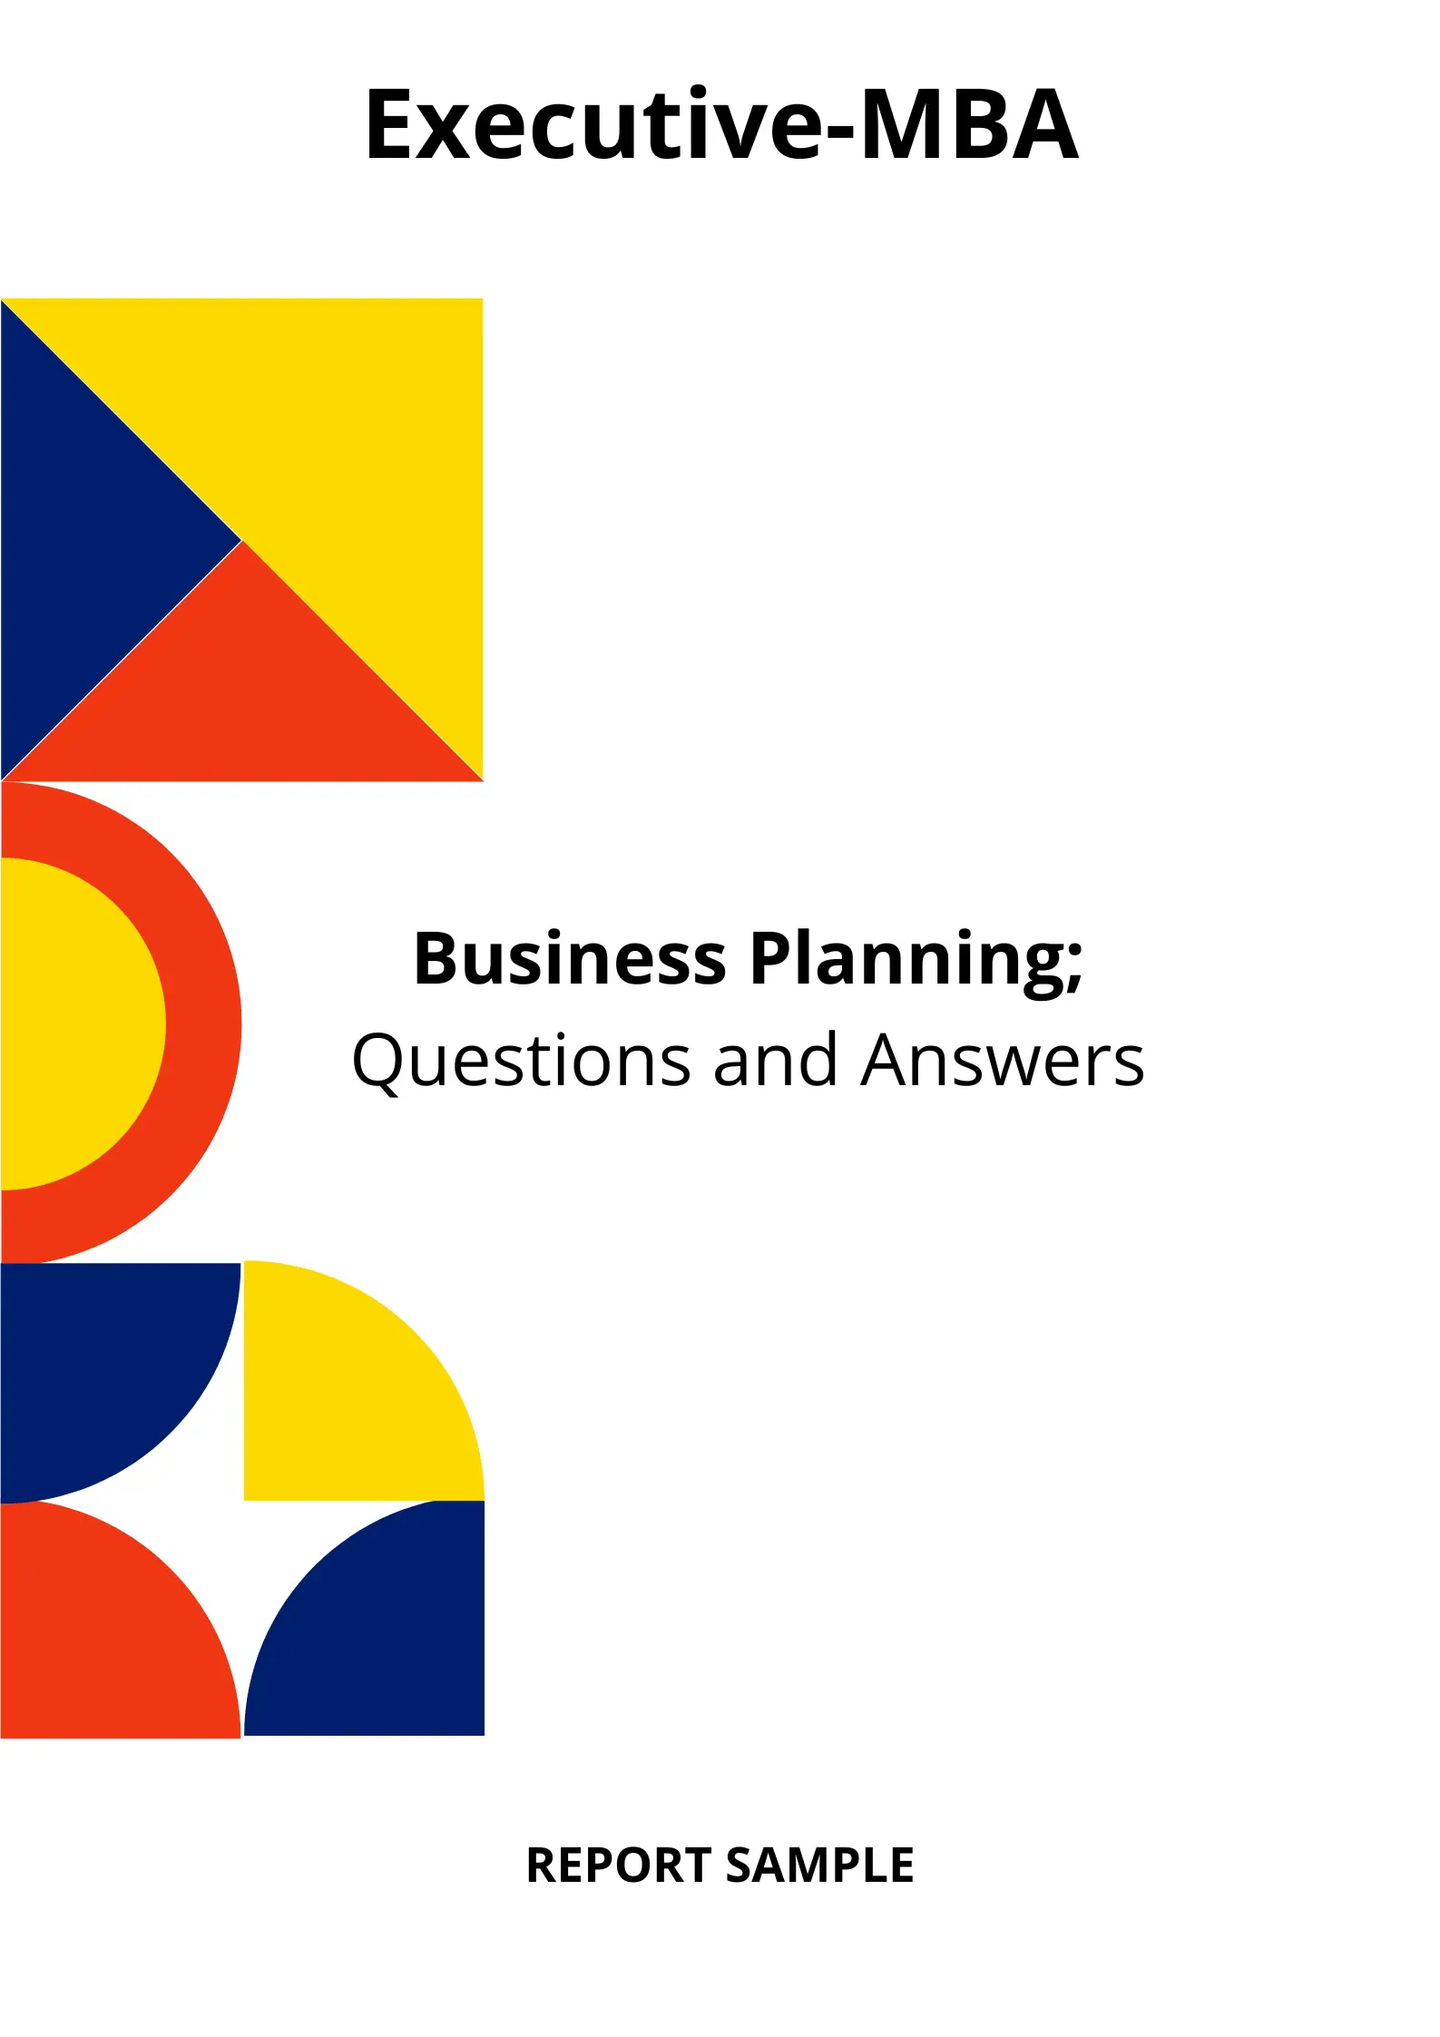 Executive-MBA Business Planning Essay Sample